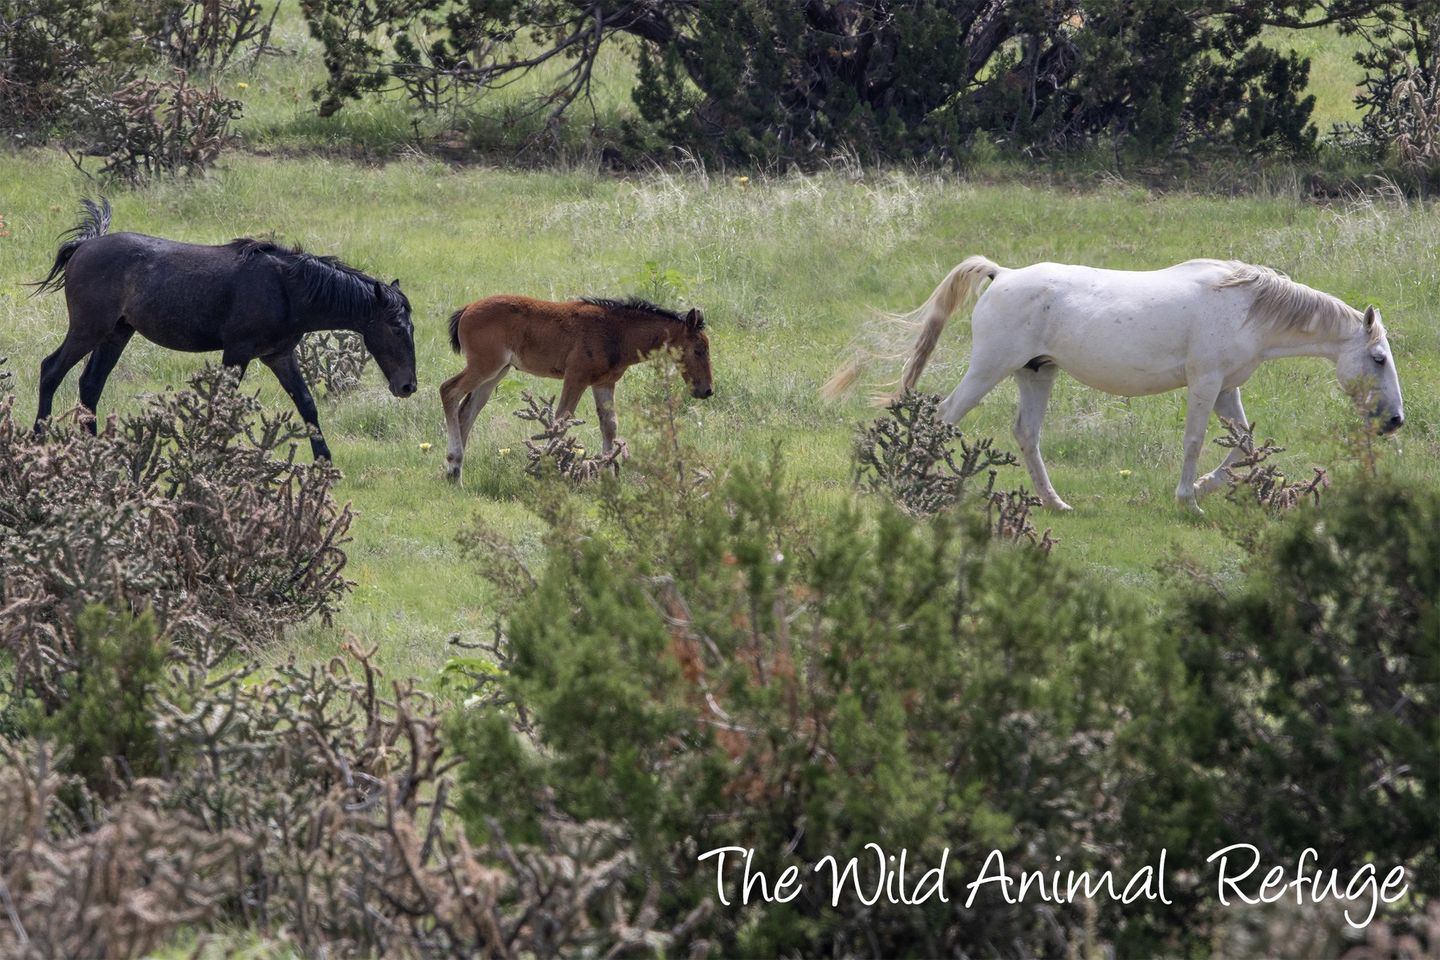 Alpine wild horses get a new home after the Apache Sitgreaves Forest Service evicted them.